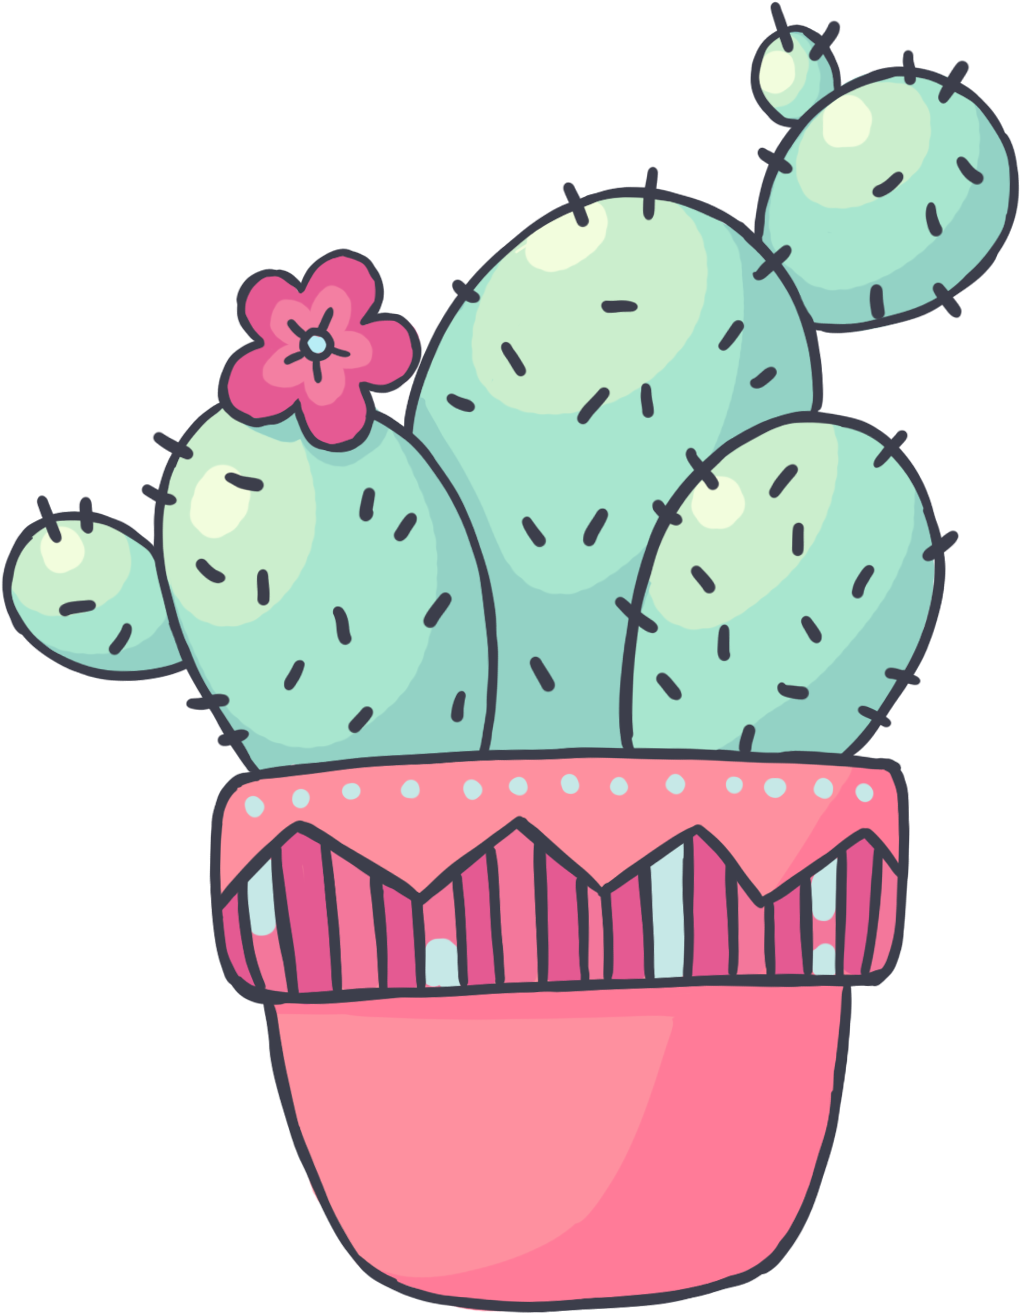 Illustrated Logos From Us$280 - Cute Cactus Transparent Background (1484x1484)